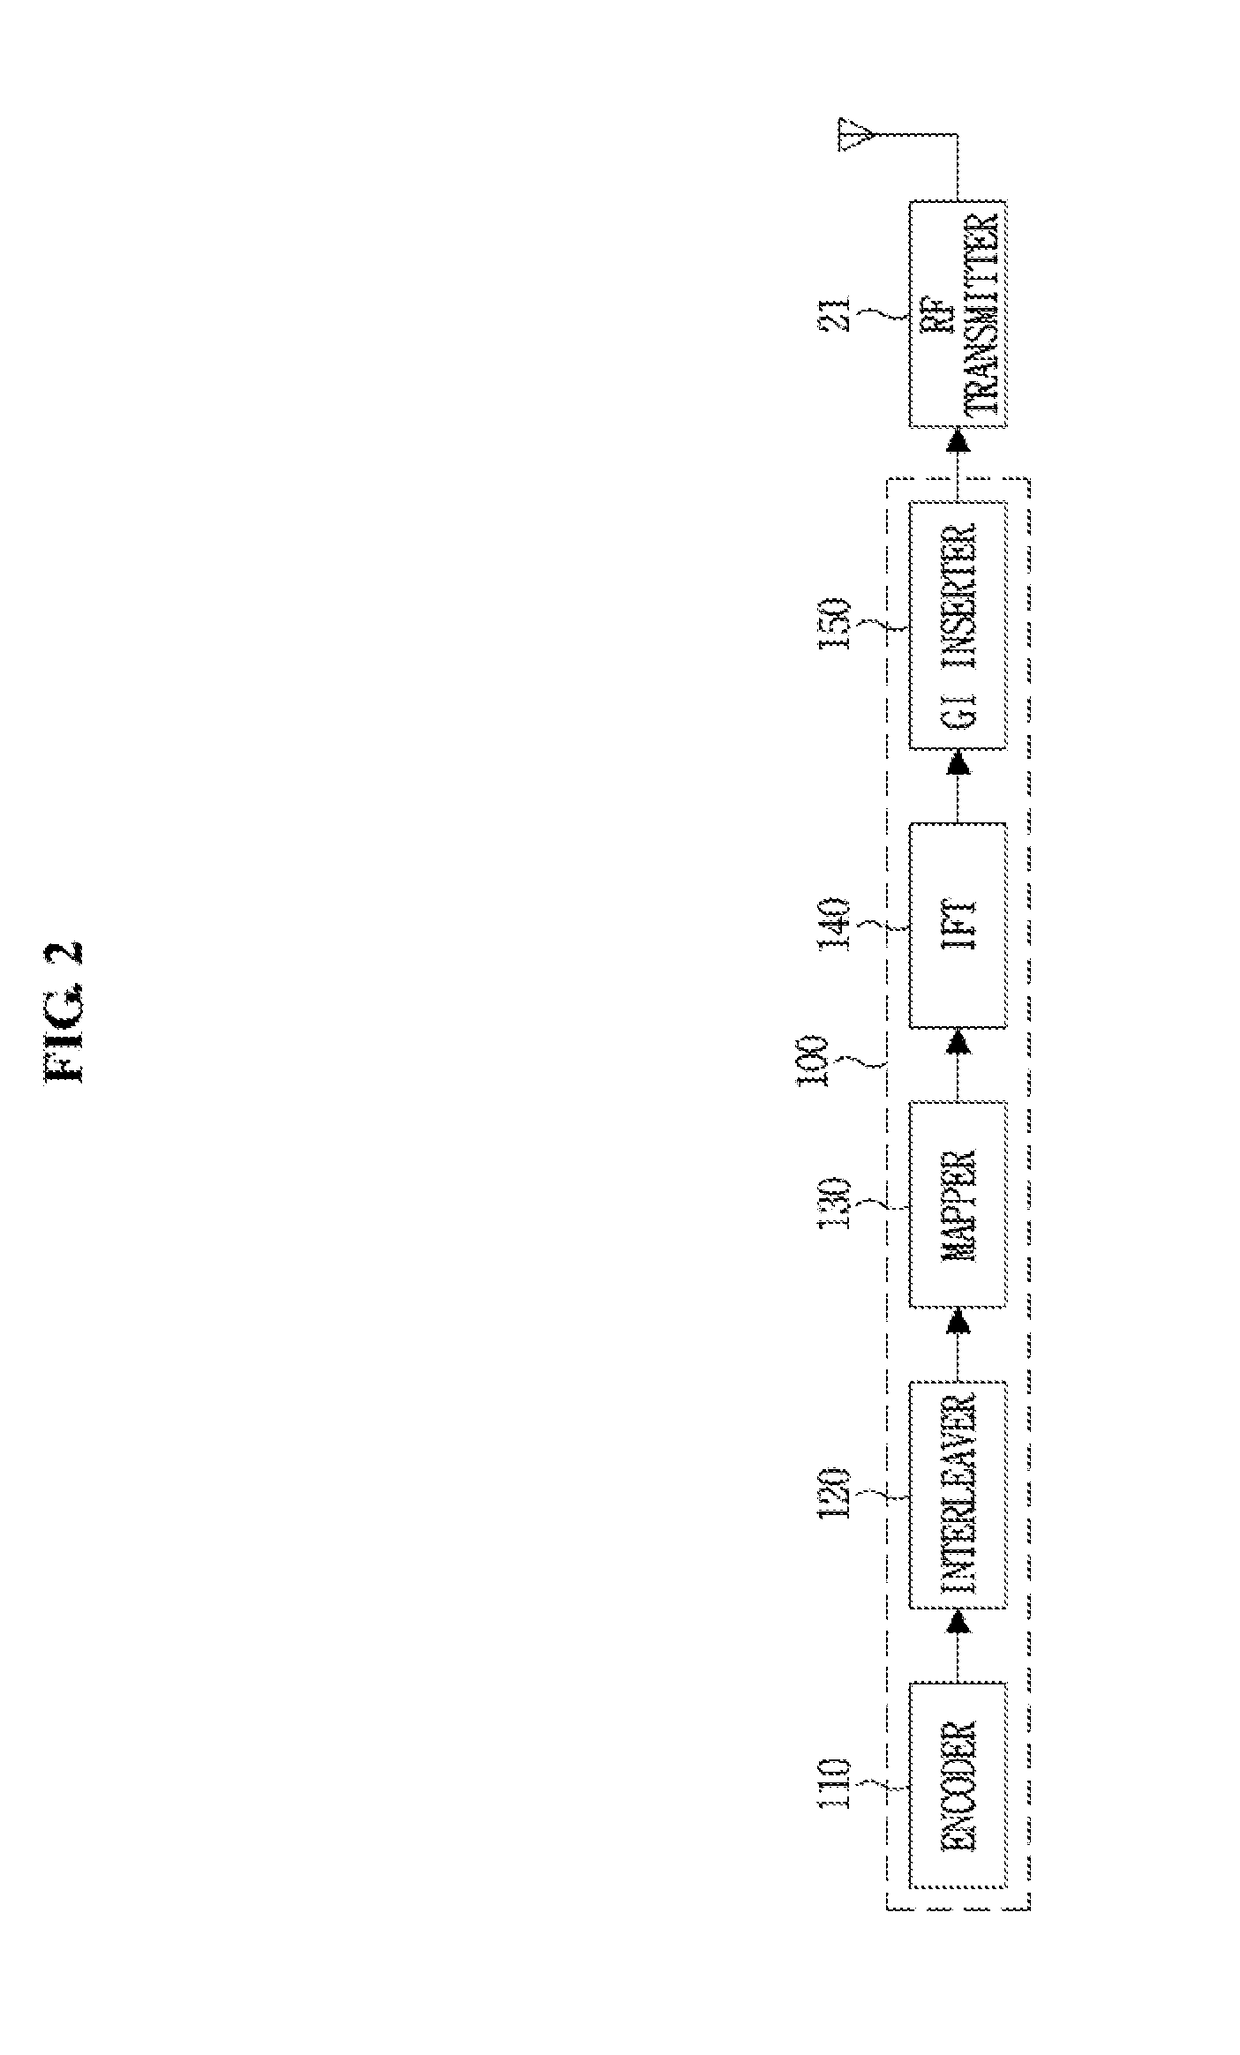 Method and apparatus for processing ppdu based on bss identification information in a high efficiency wireless LAN